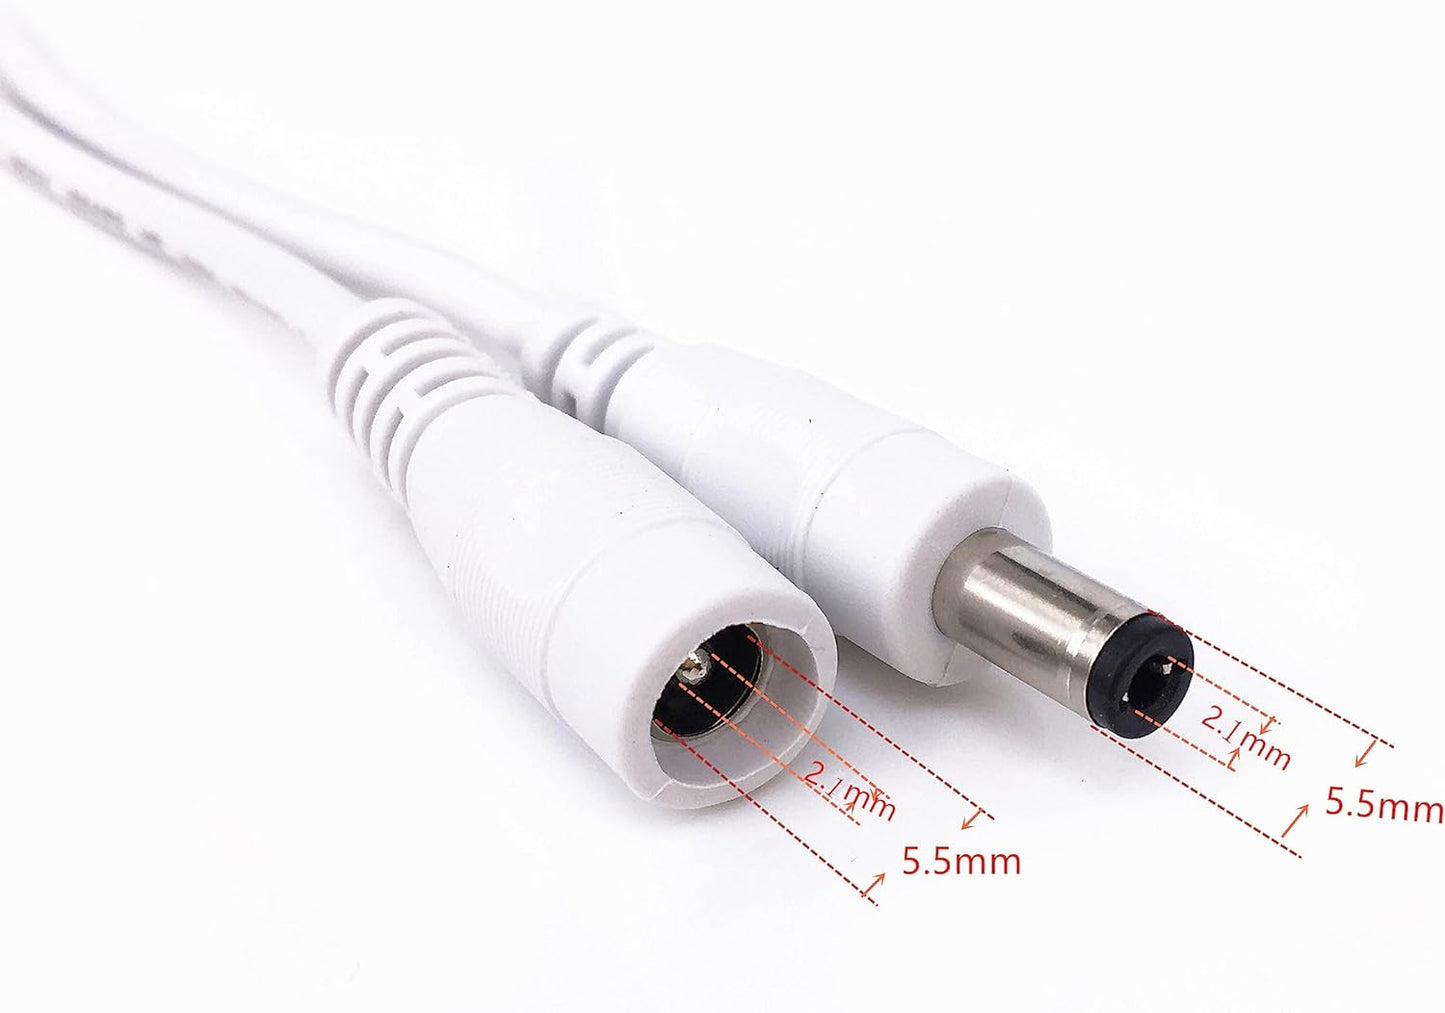 Crystal Vision 4.5m/15ft White 5.5mm x 2.1mm DC Plug Extension Cable for Power Adapter DC Power 12V 5.5mm x 2.1mm Barrel Male Plug Connector